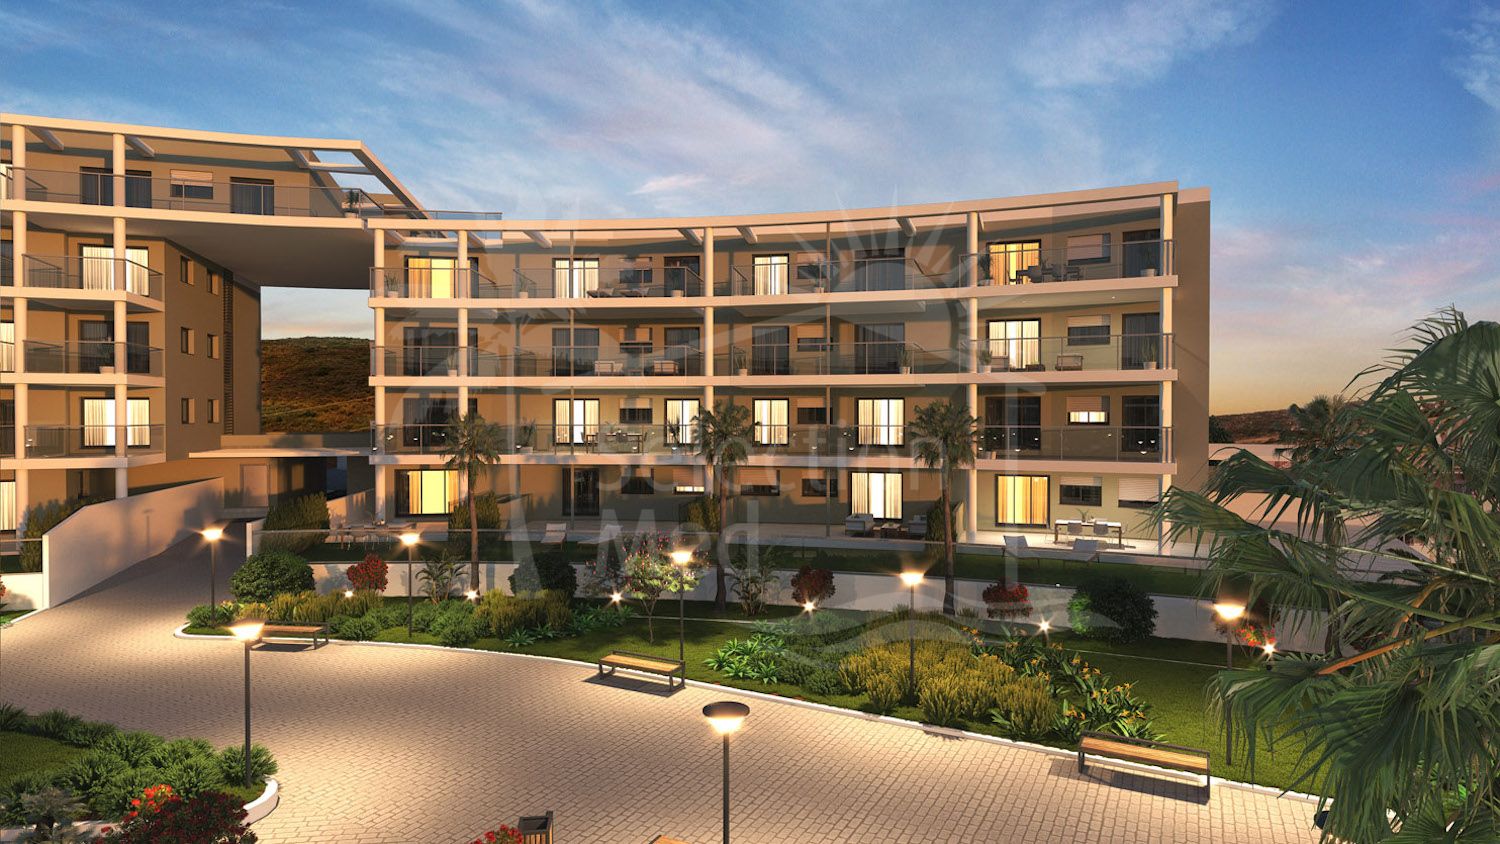 Off Plan development of 2 and 3 bedroom Apartments, Walking Distance to the Beach in Manilva.